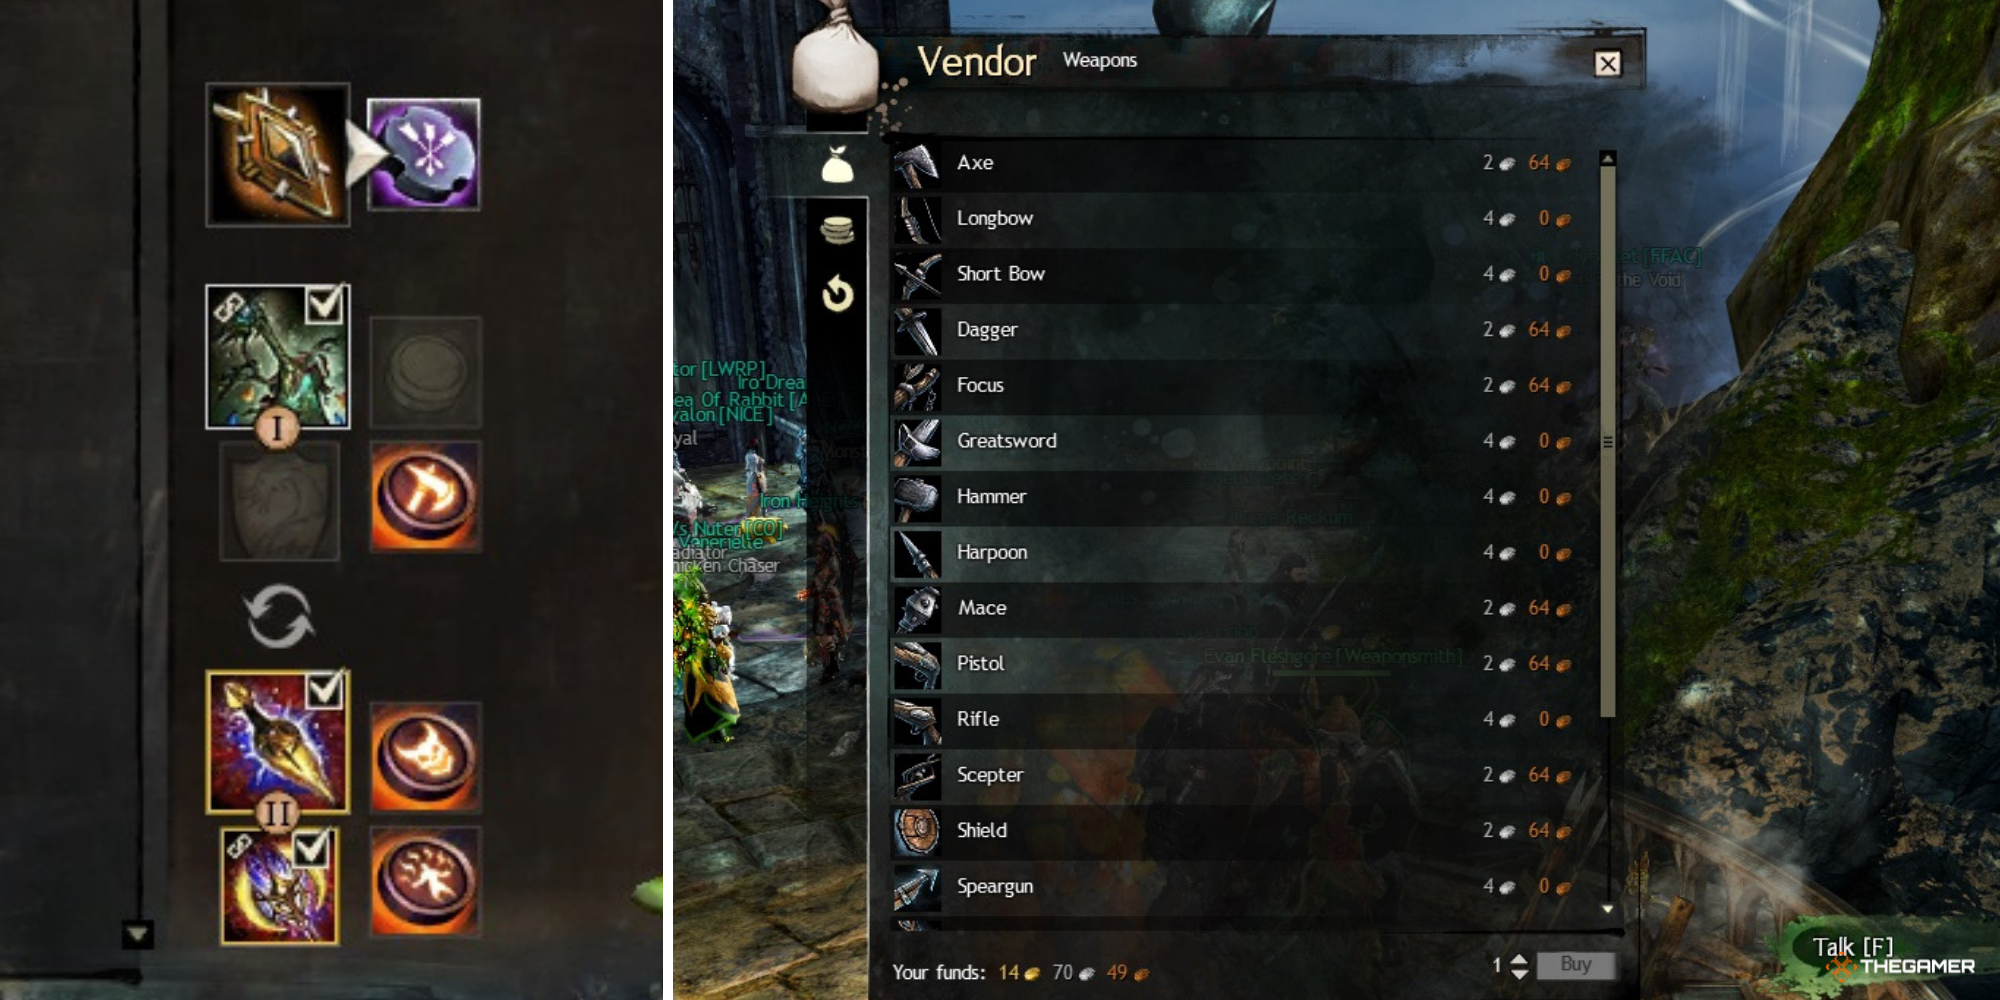 Guild Wars 2 - PvP build weapons on left, PvP lobby Weapons Vendor on right